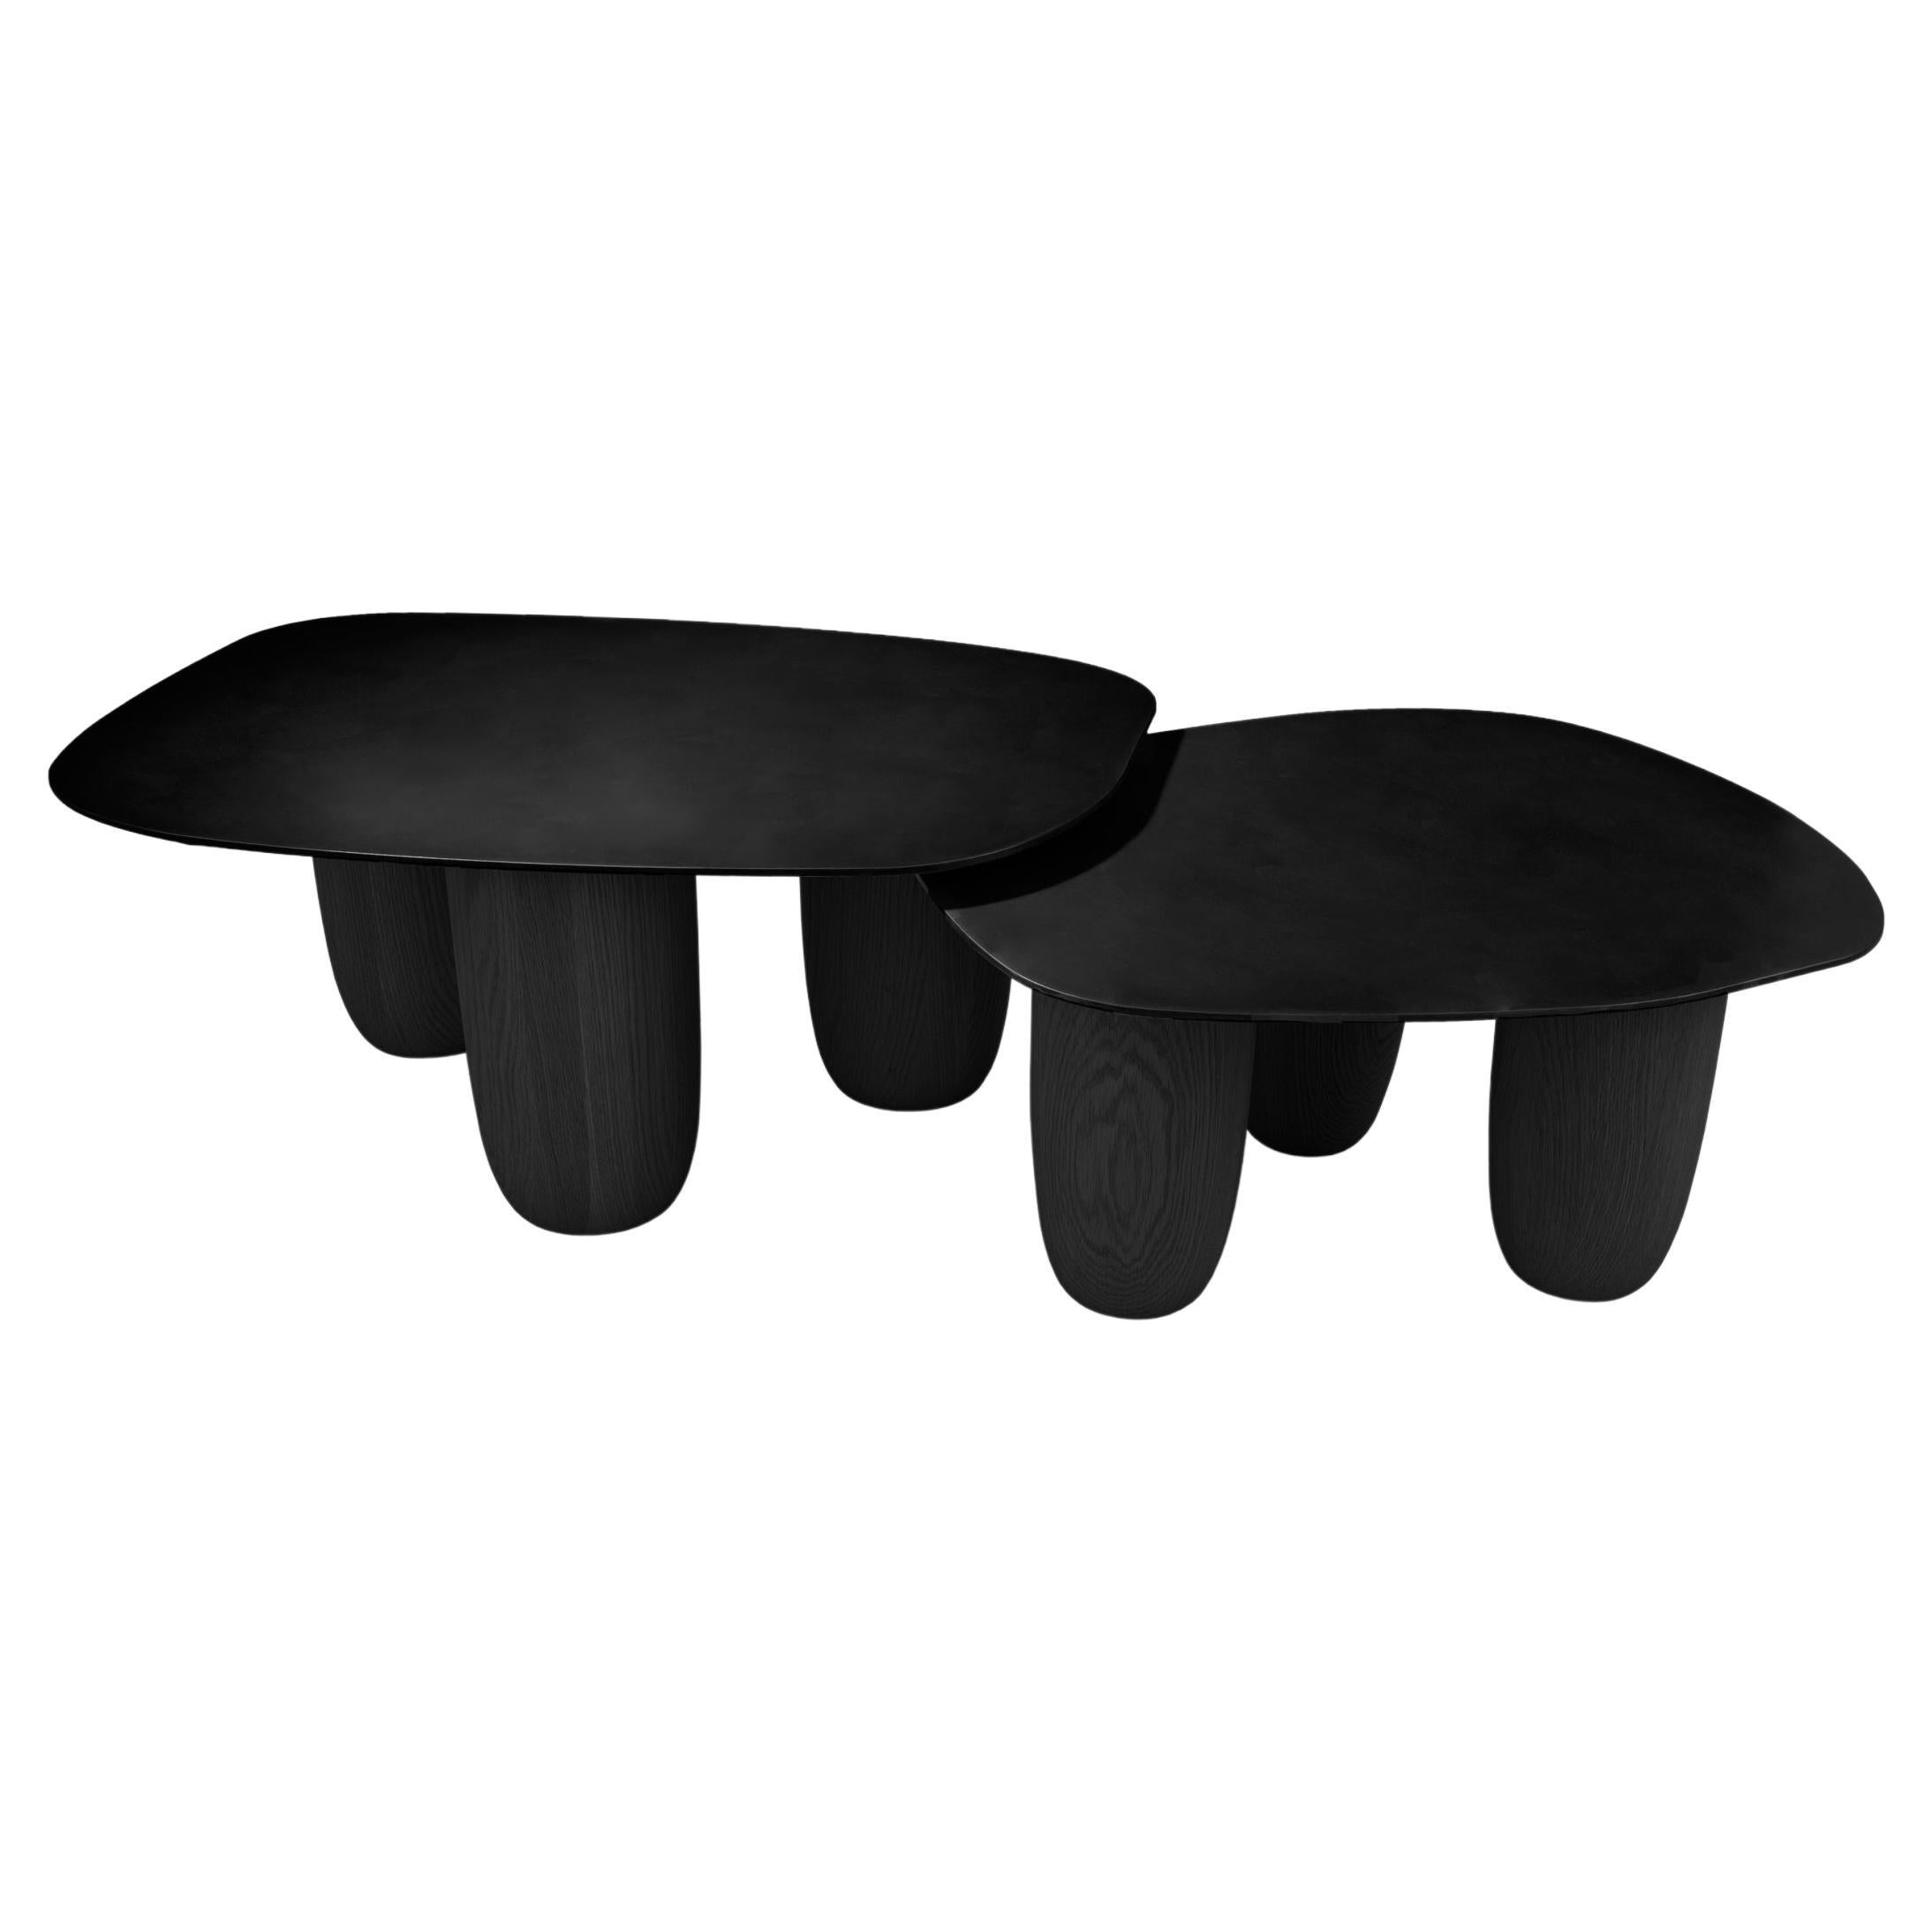 Contemporary Low Tables in Matte Black Steel and Oak Legs by Vivian Carbonell